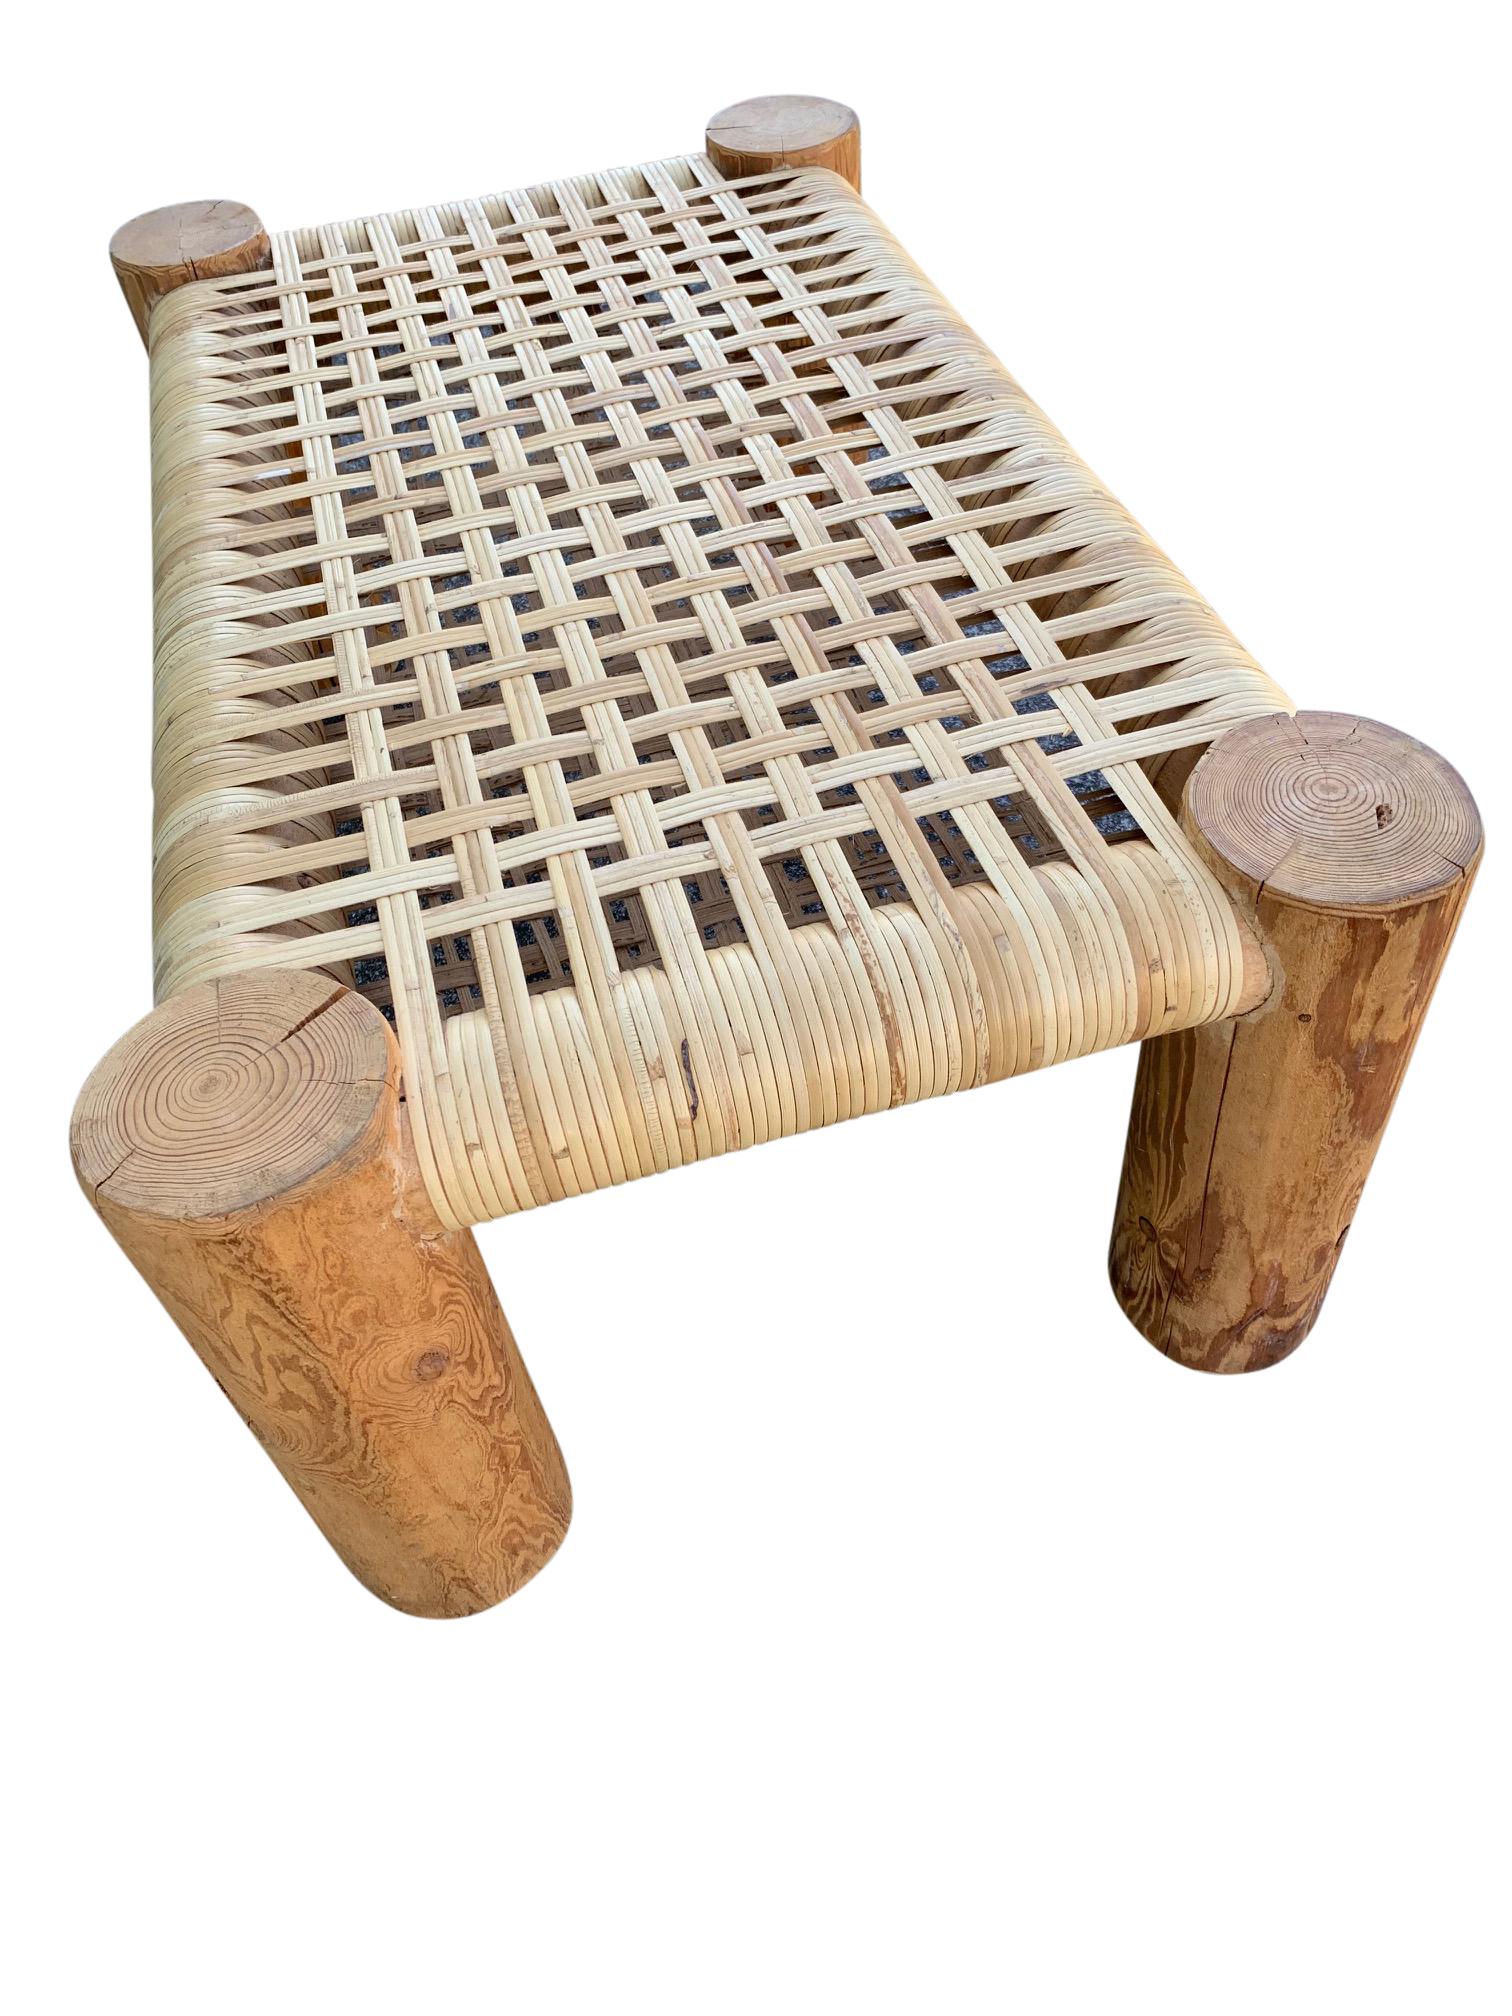 Cane Wicker Wrapped Modern Rustic Wood Bench Table For Sale 1